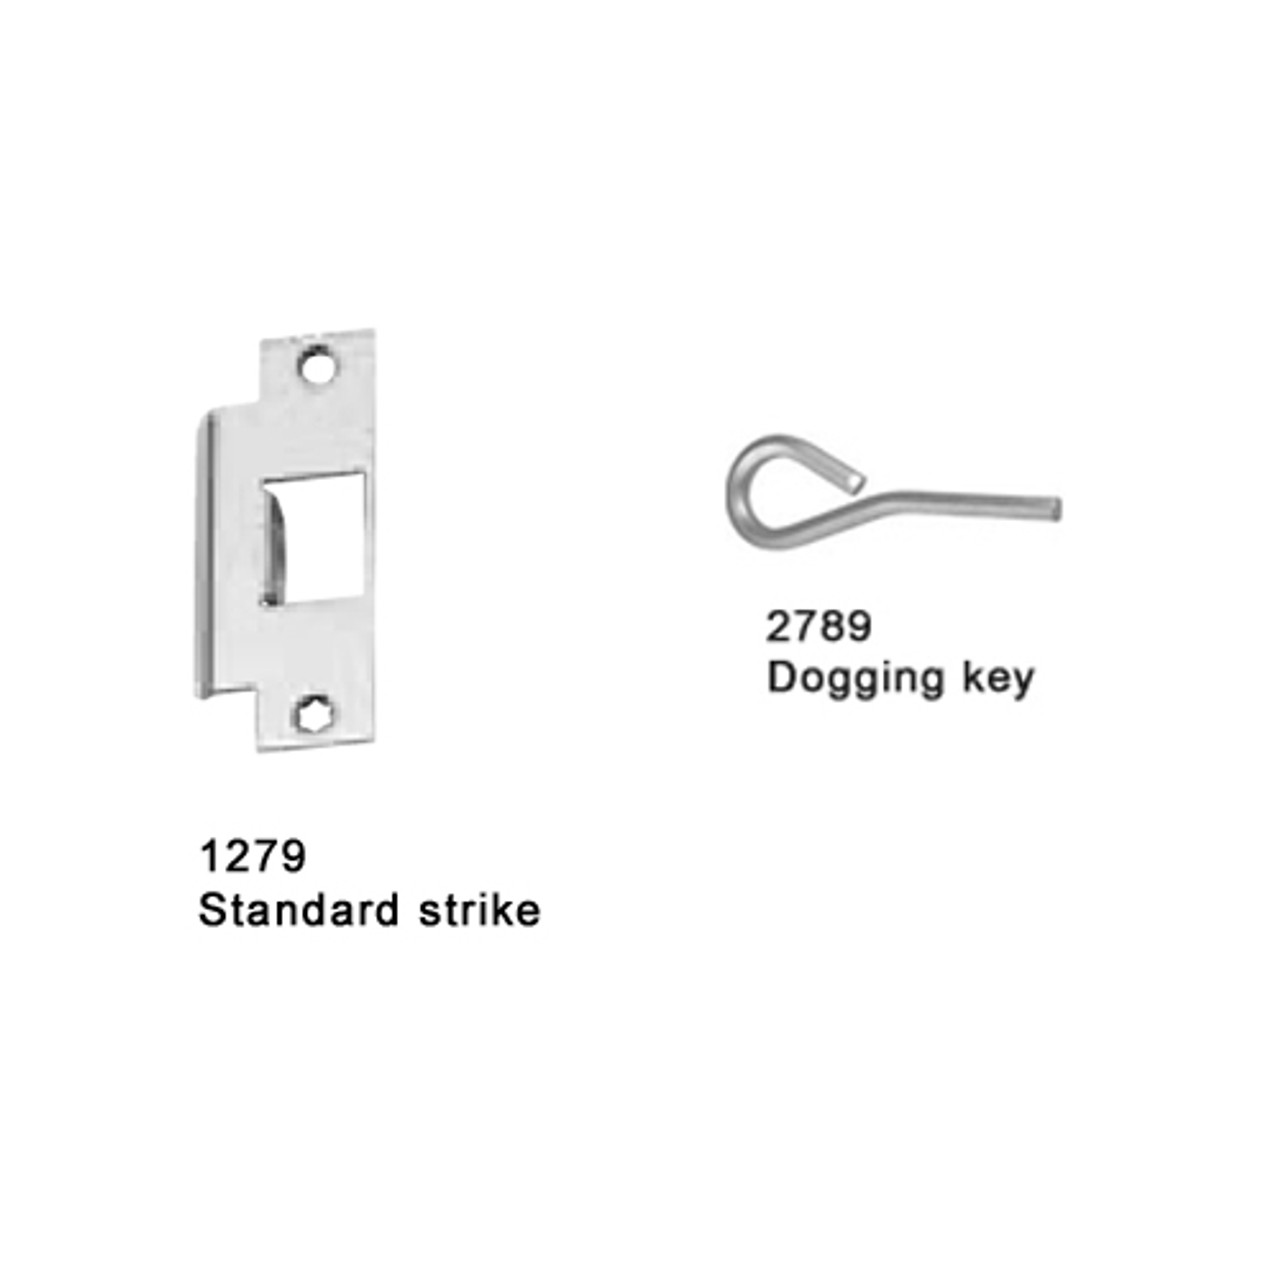 25-M-L-DT-DANE-US3-3-LHR Falcon 25 Series Mortise Lock Devices 510L-DT Dane Lever Trim with Dummy Trim in Polished Brass